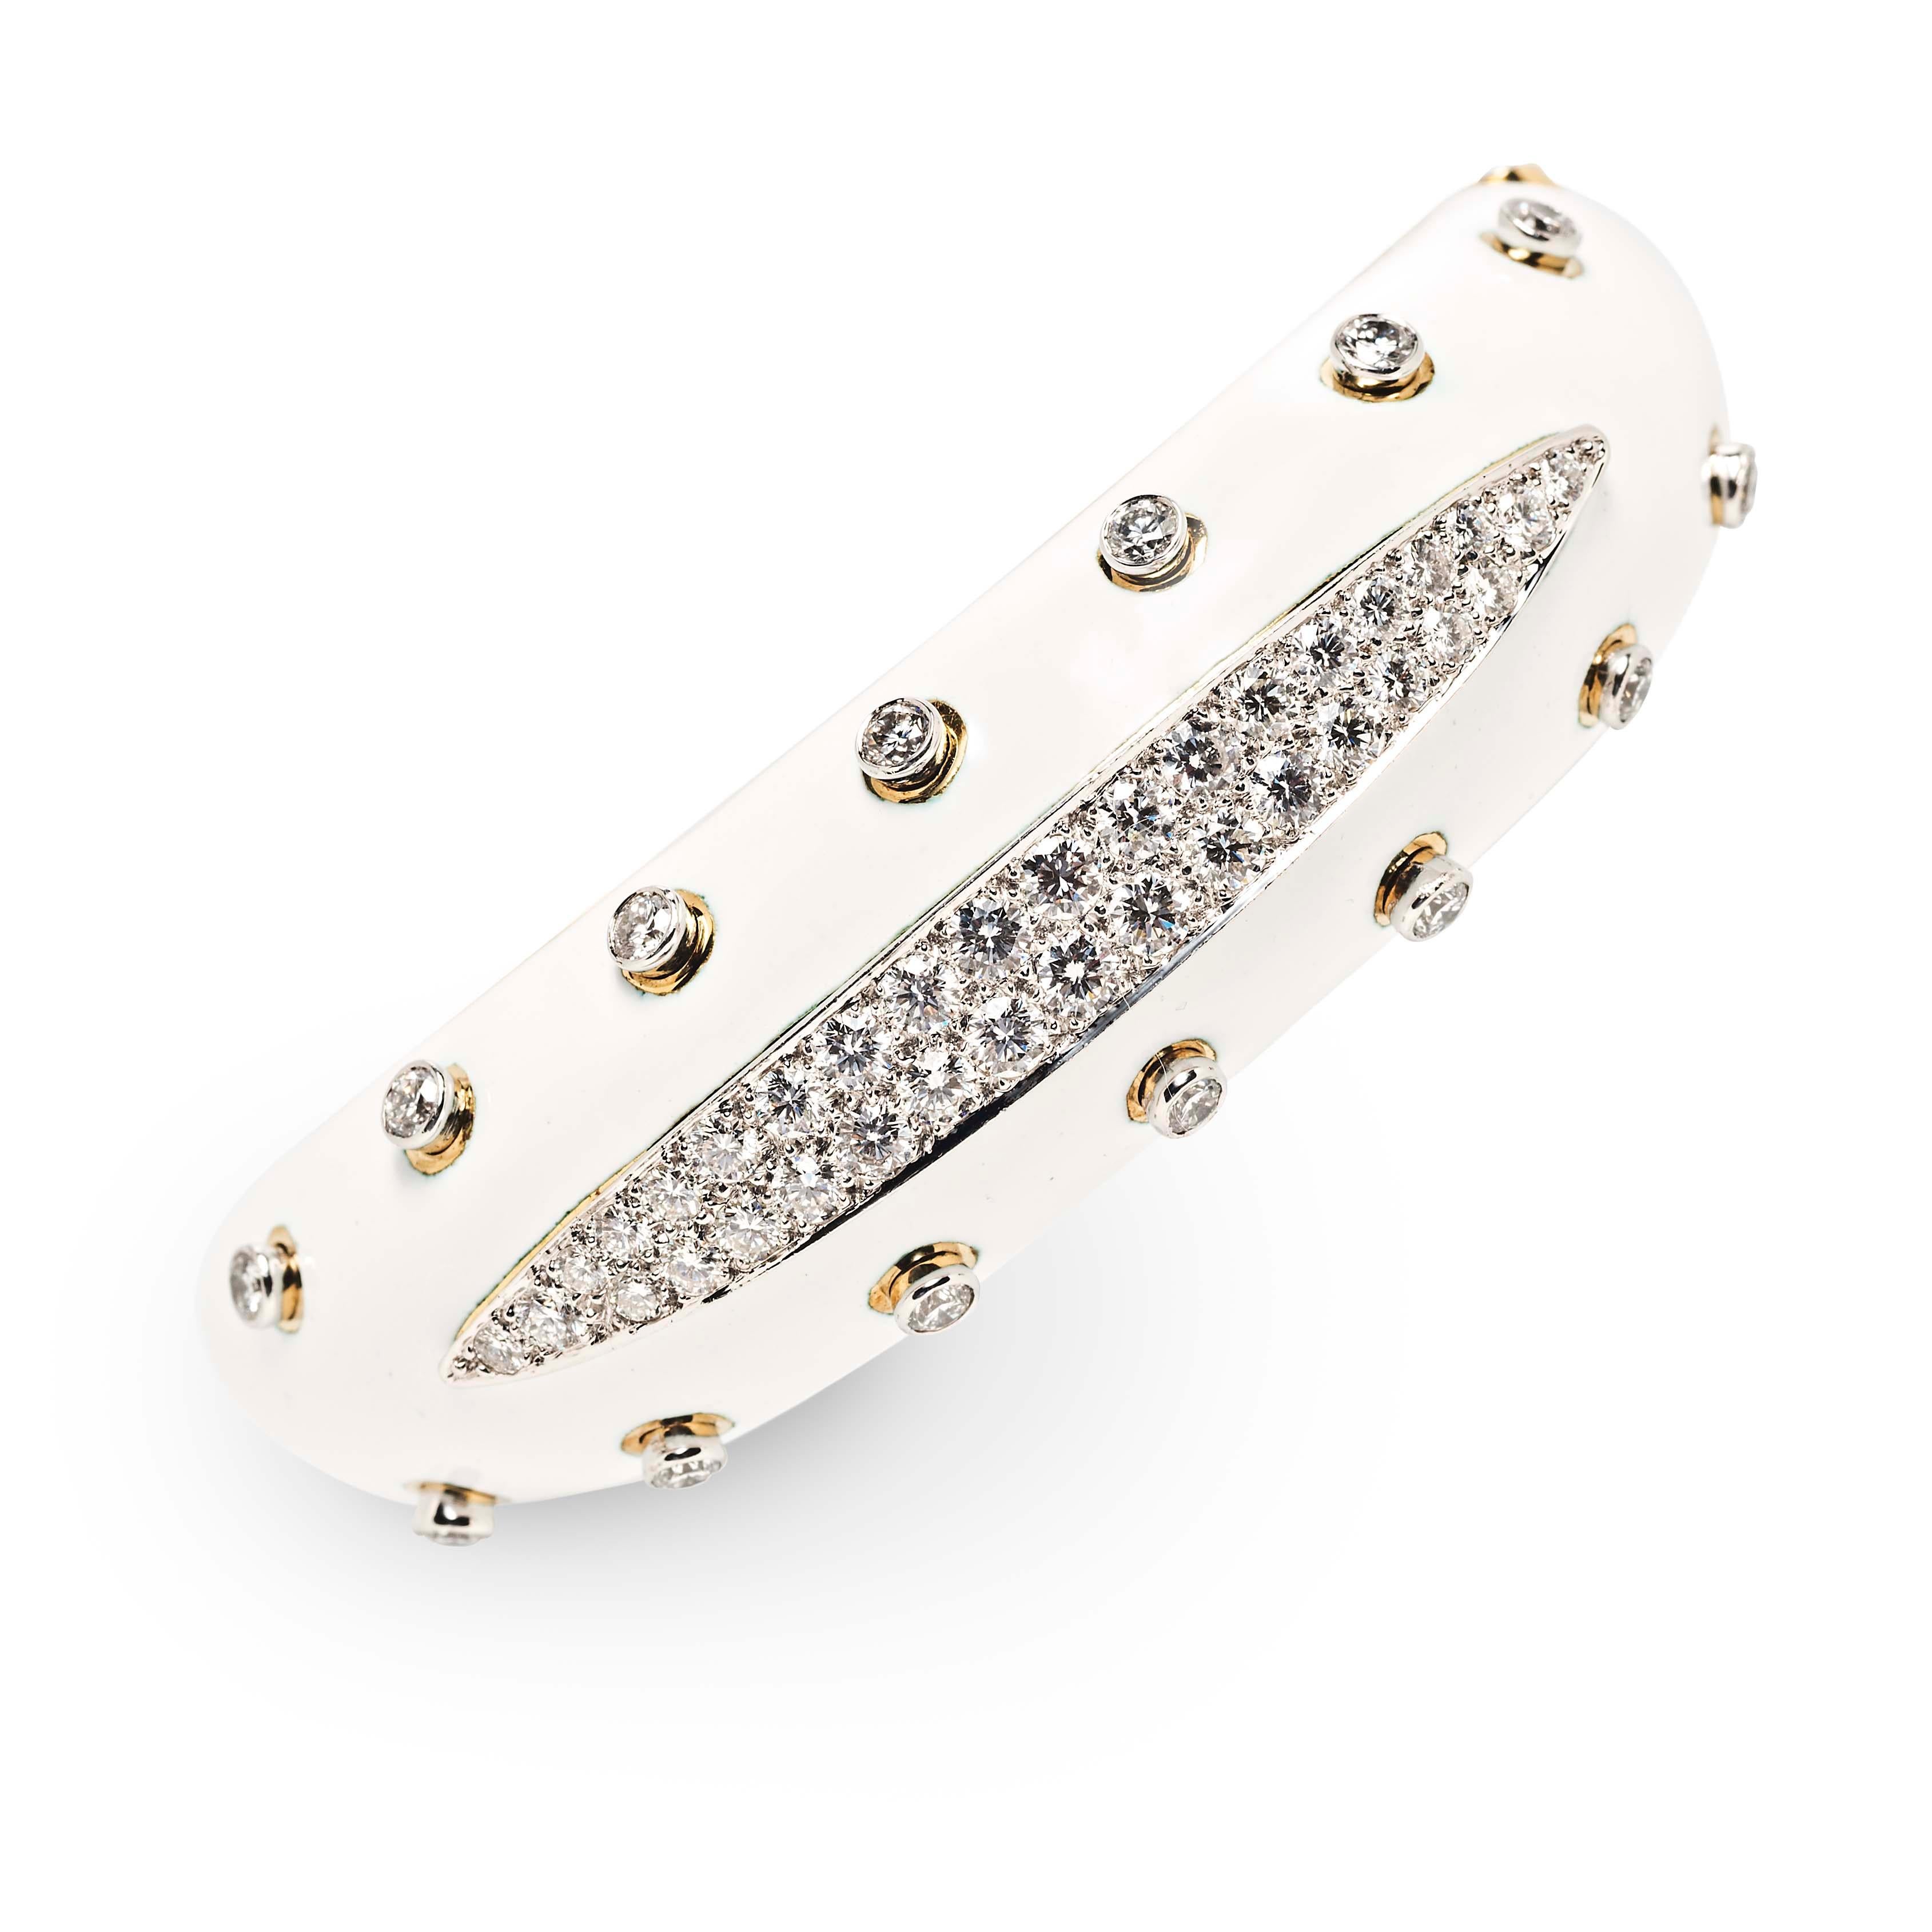 Designed for a double take, the Slice Cuff from David Webb is the ultimate combination of classic chic and full-blown glamour. A grooved line of pavé-set diamonds, highlighted by diamond collet studs, is set on a ground of white enamel. Closing with